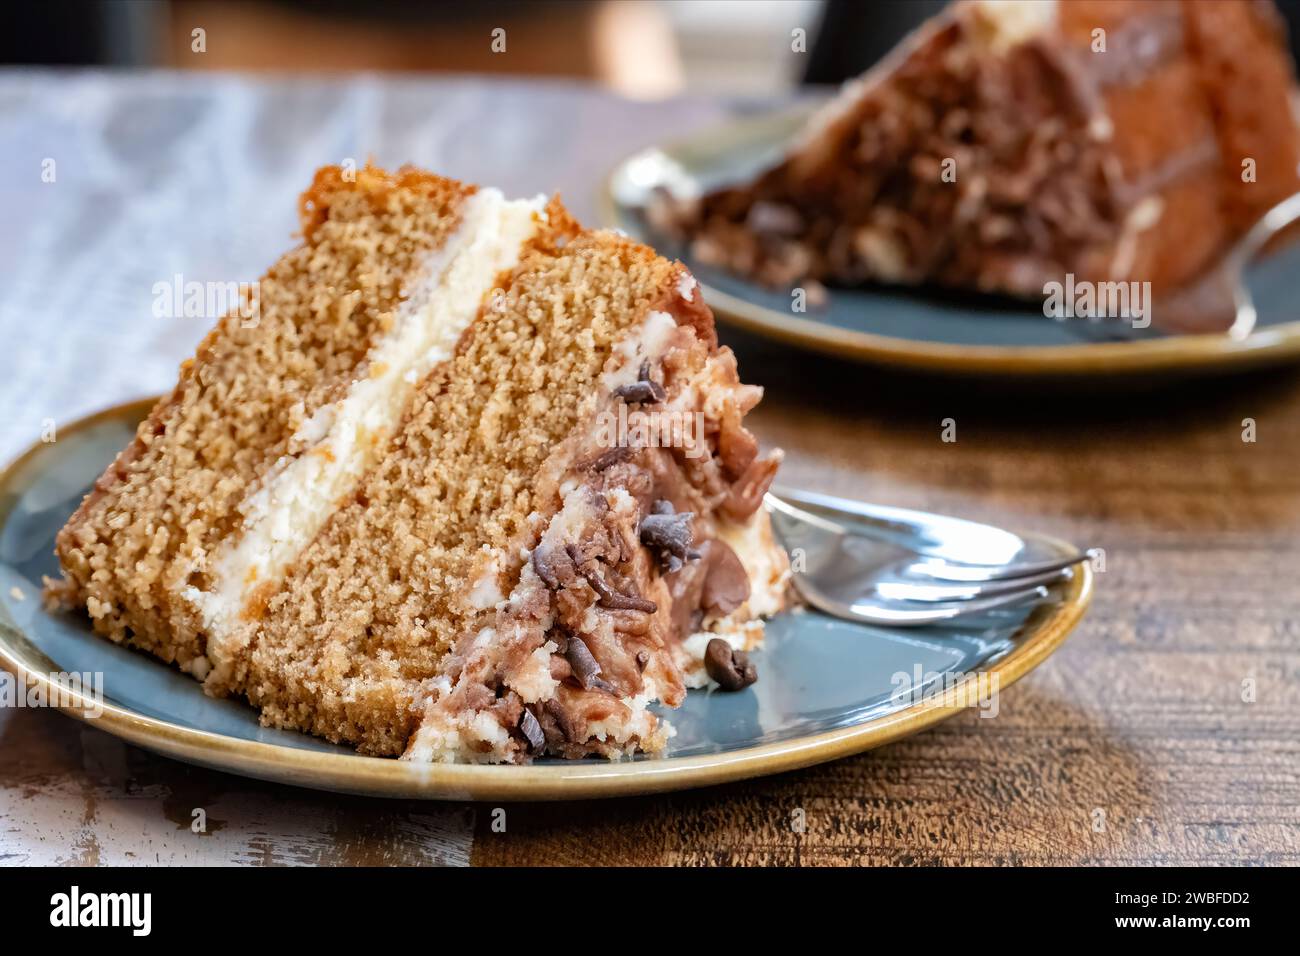 A serving or portion of cappuccino coffee cake plated and served on a cafe table. The cake is two tiered and has a buttercream filling and top Stock Photo